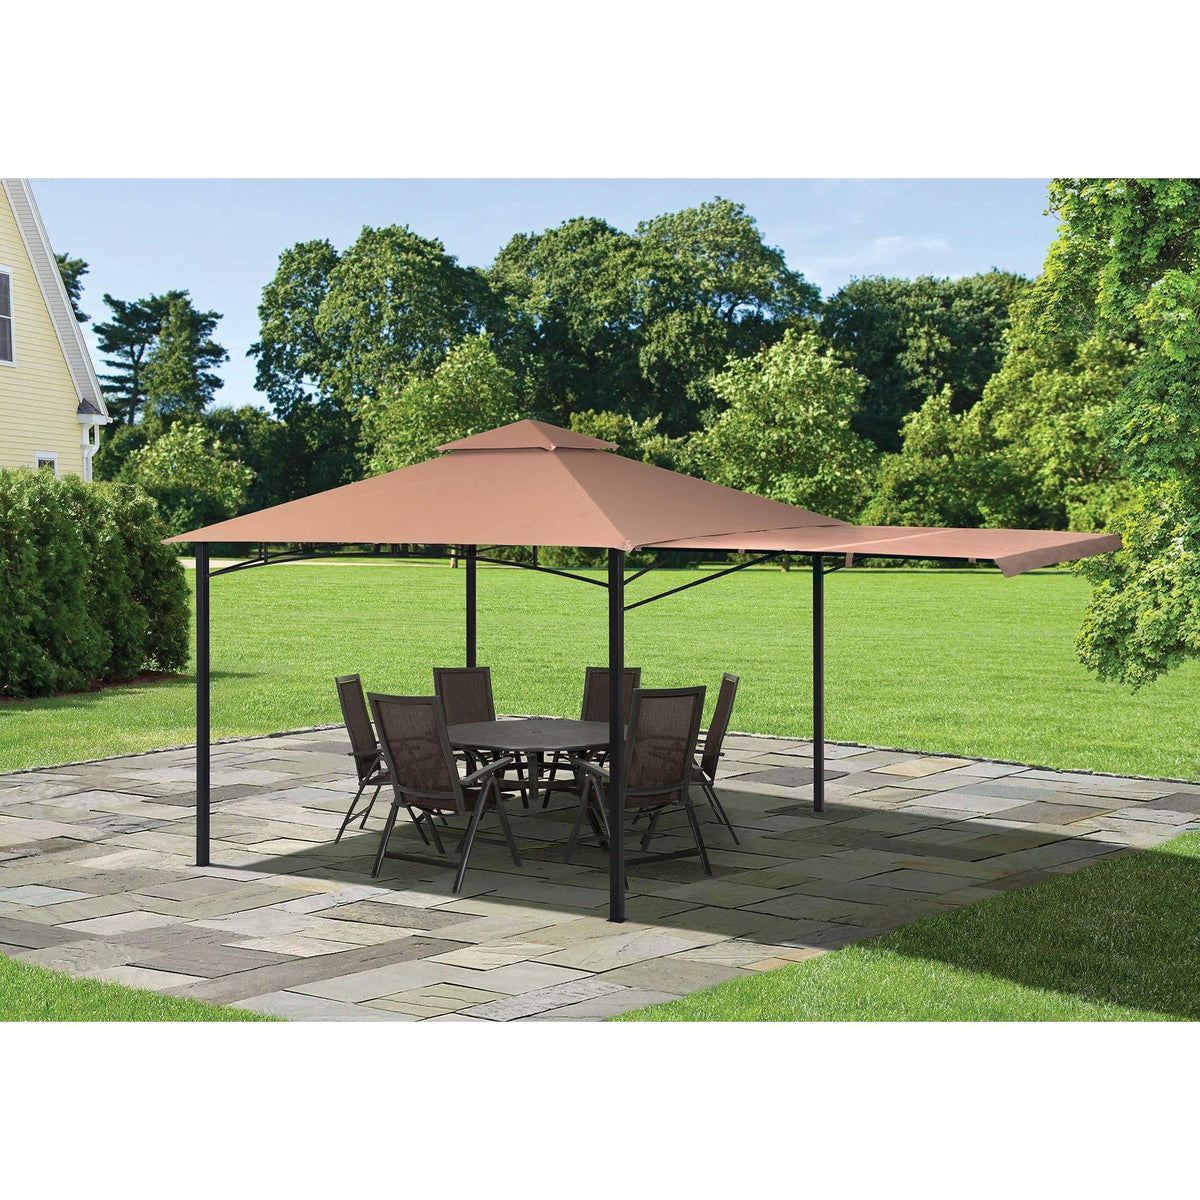 ShelterLogic Canopy Series Redwood 11 x 11-Foot Easy Assembly Seasonal Shade UV Protection with Extendable Awning Outdoor Gazebo, x 11'